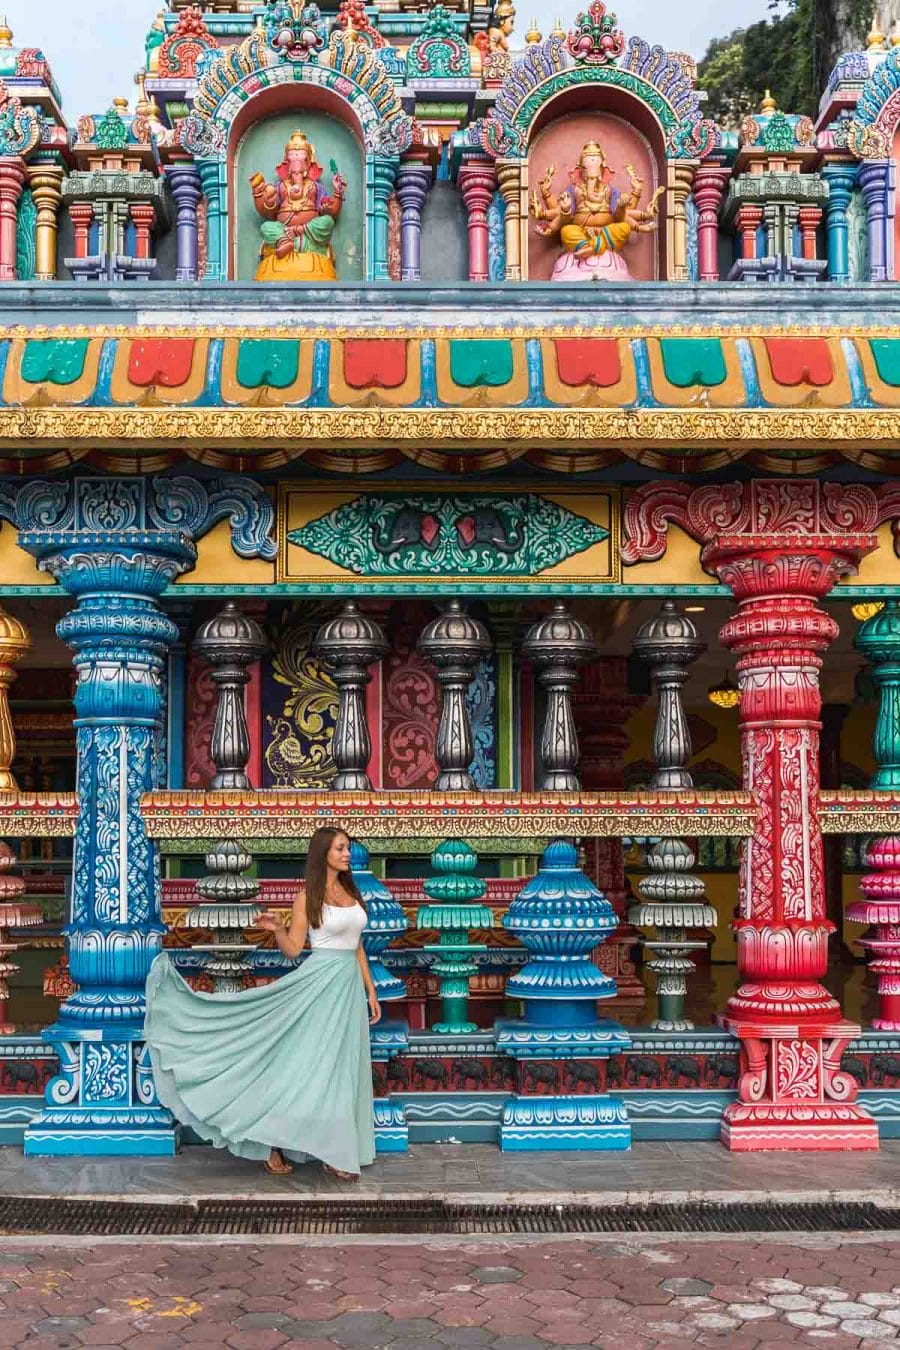 Girl in a blue skirt standing in front of the colorful columns at the Batu Caves in Kuala Lumpur, Malaysia